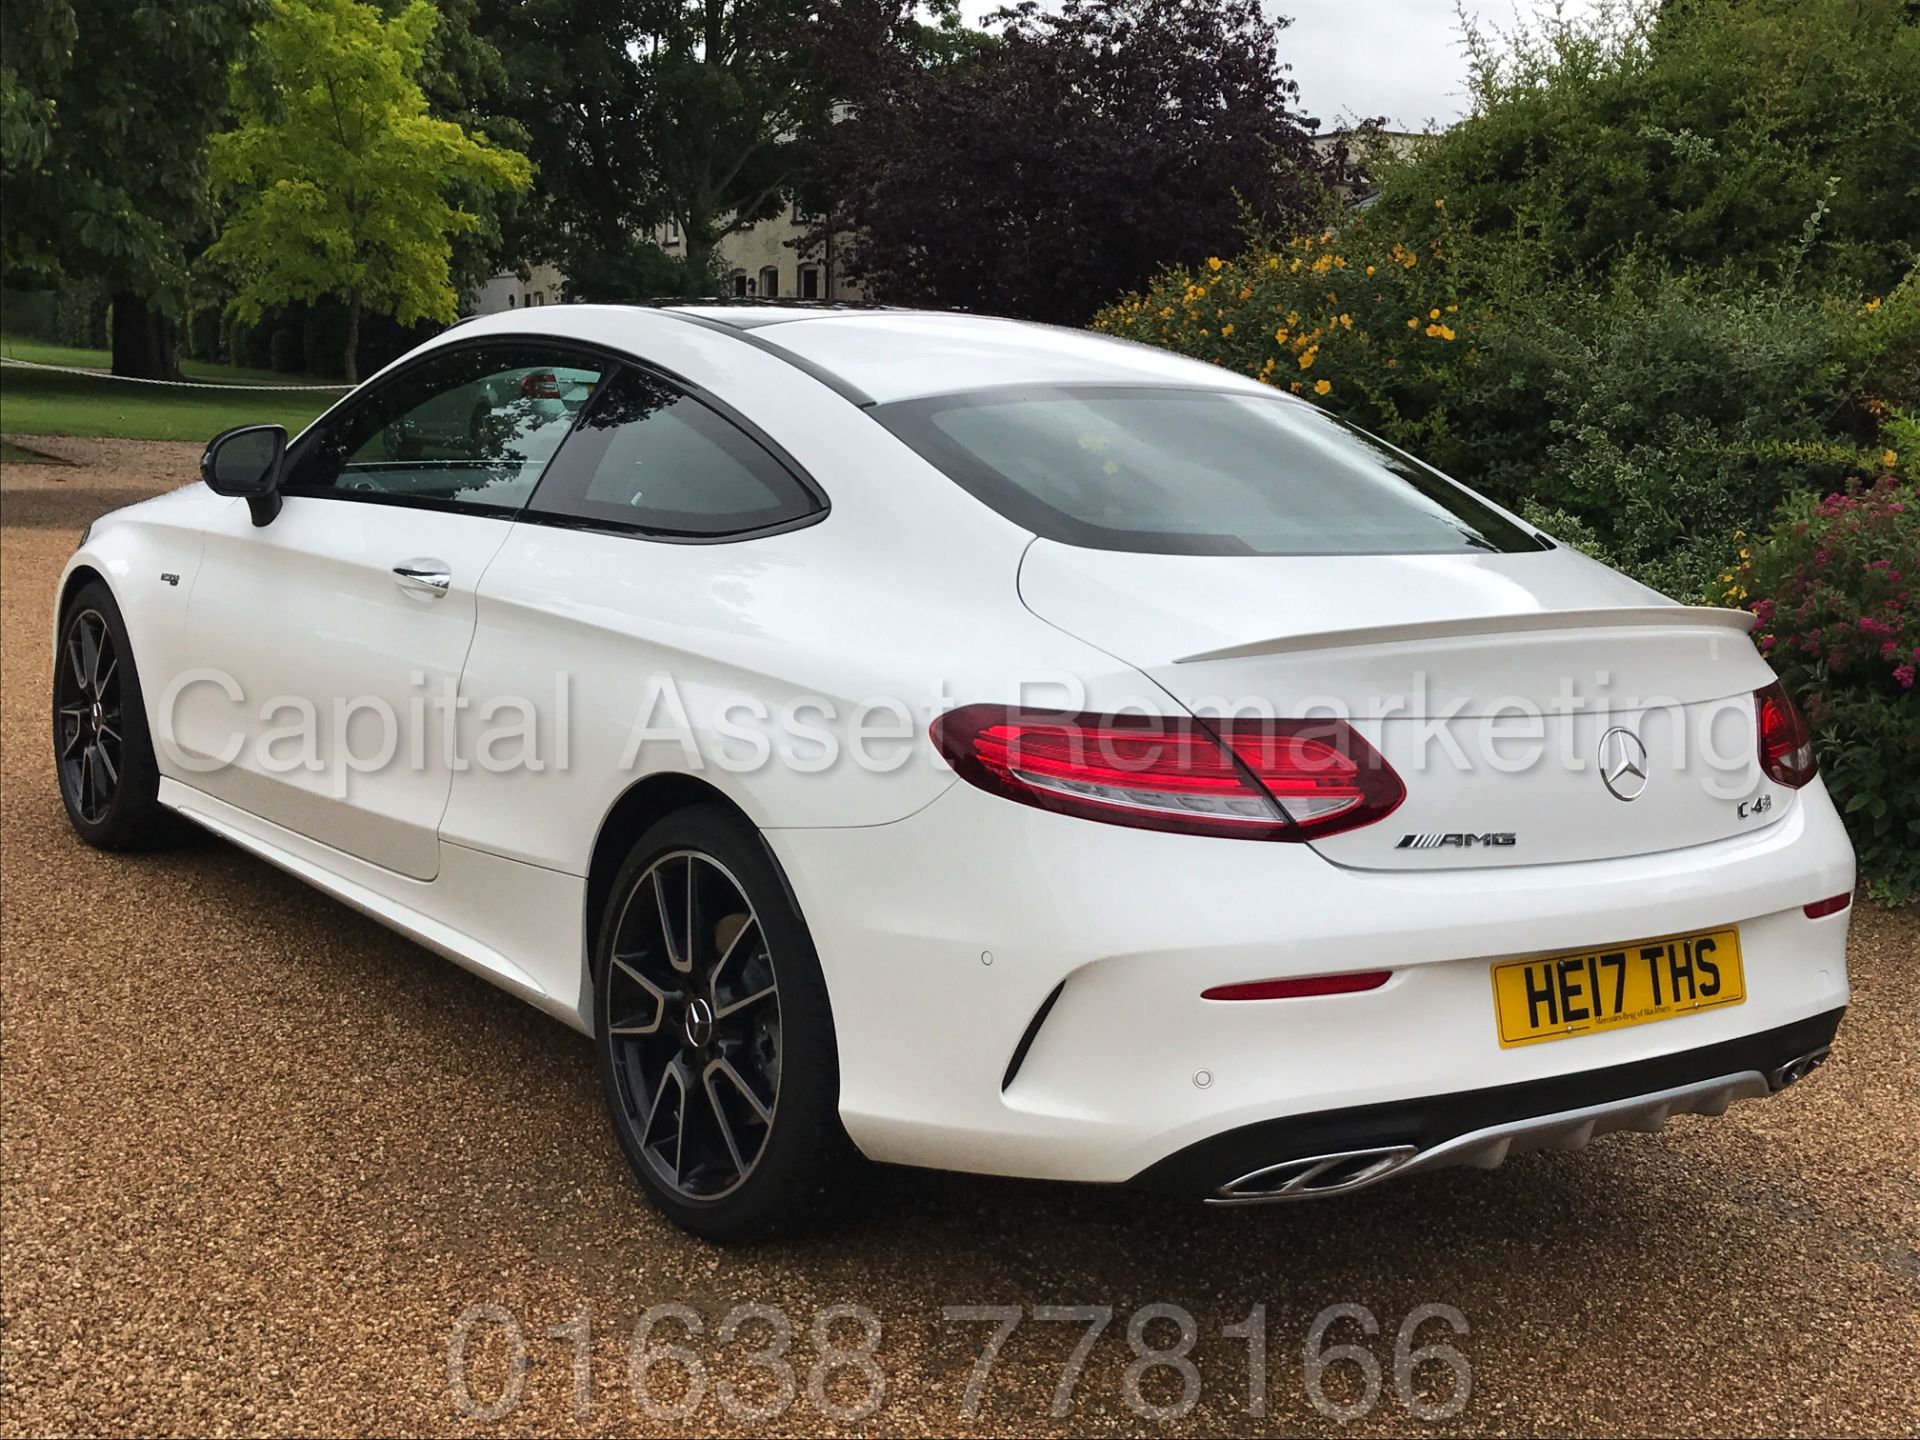 MEREDES-BENZ C43 AMG PREMIUM '4 MATIC' COUPE (2017) '9-G AUTO - LEATHER - SAT NAV' **FULLY LOADED** - Image 11 of 57